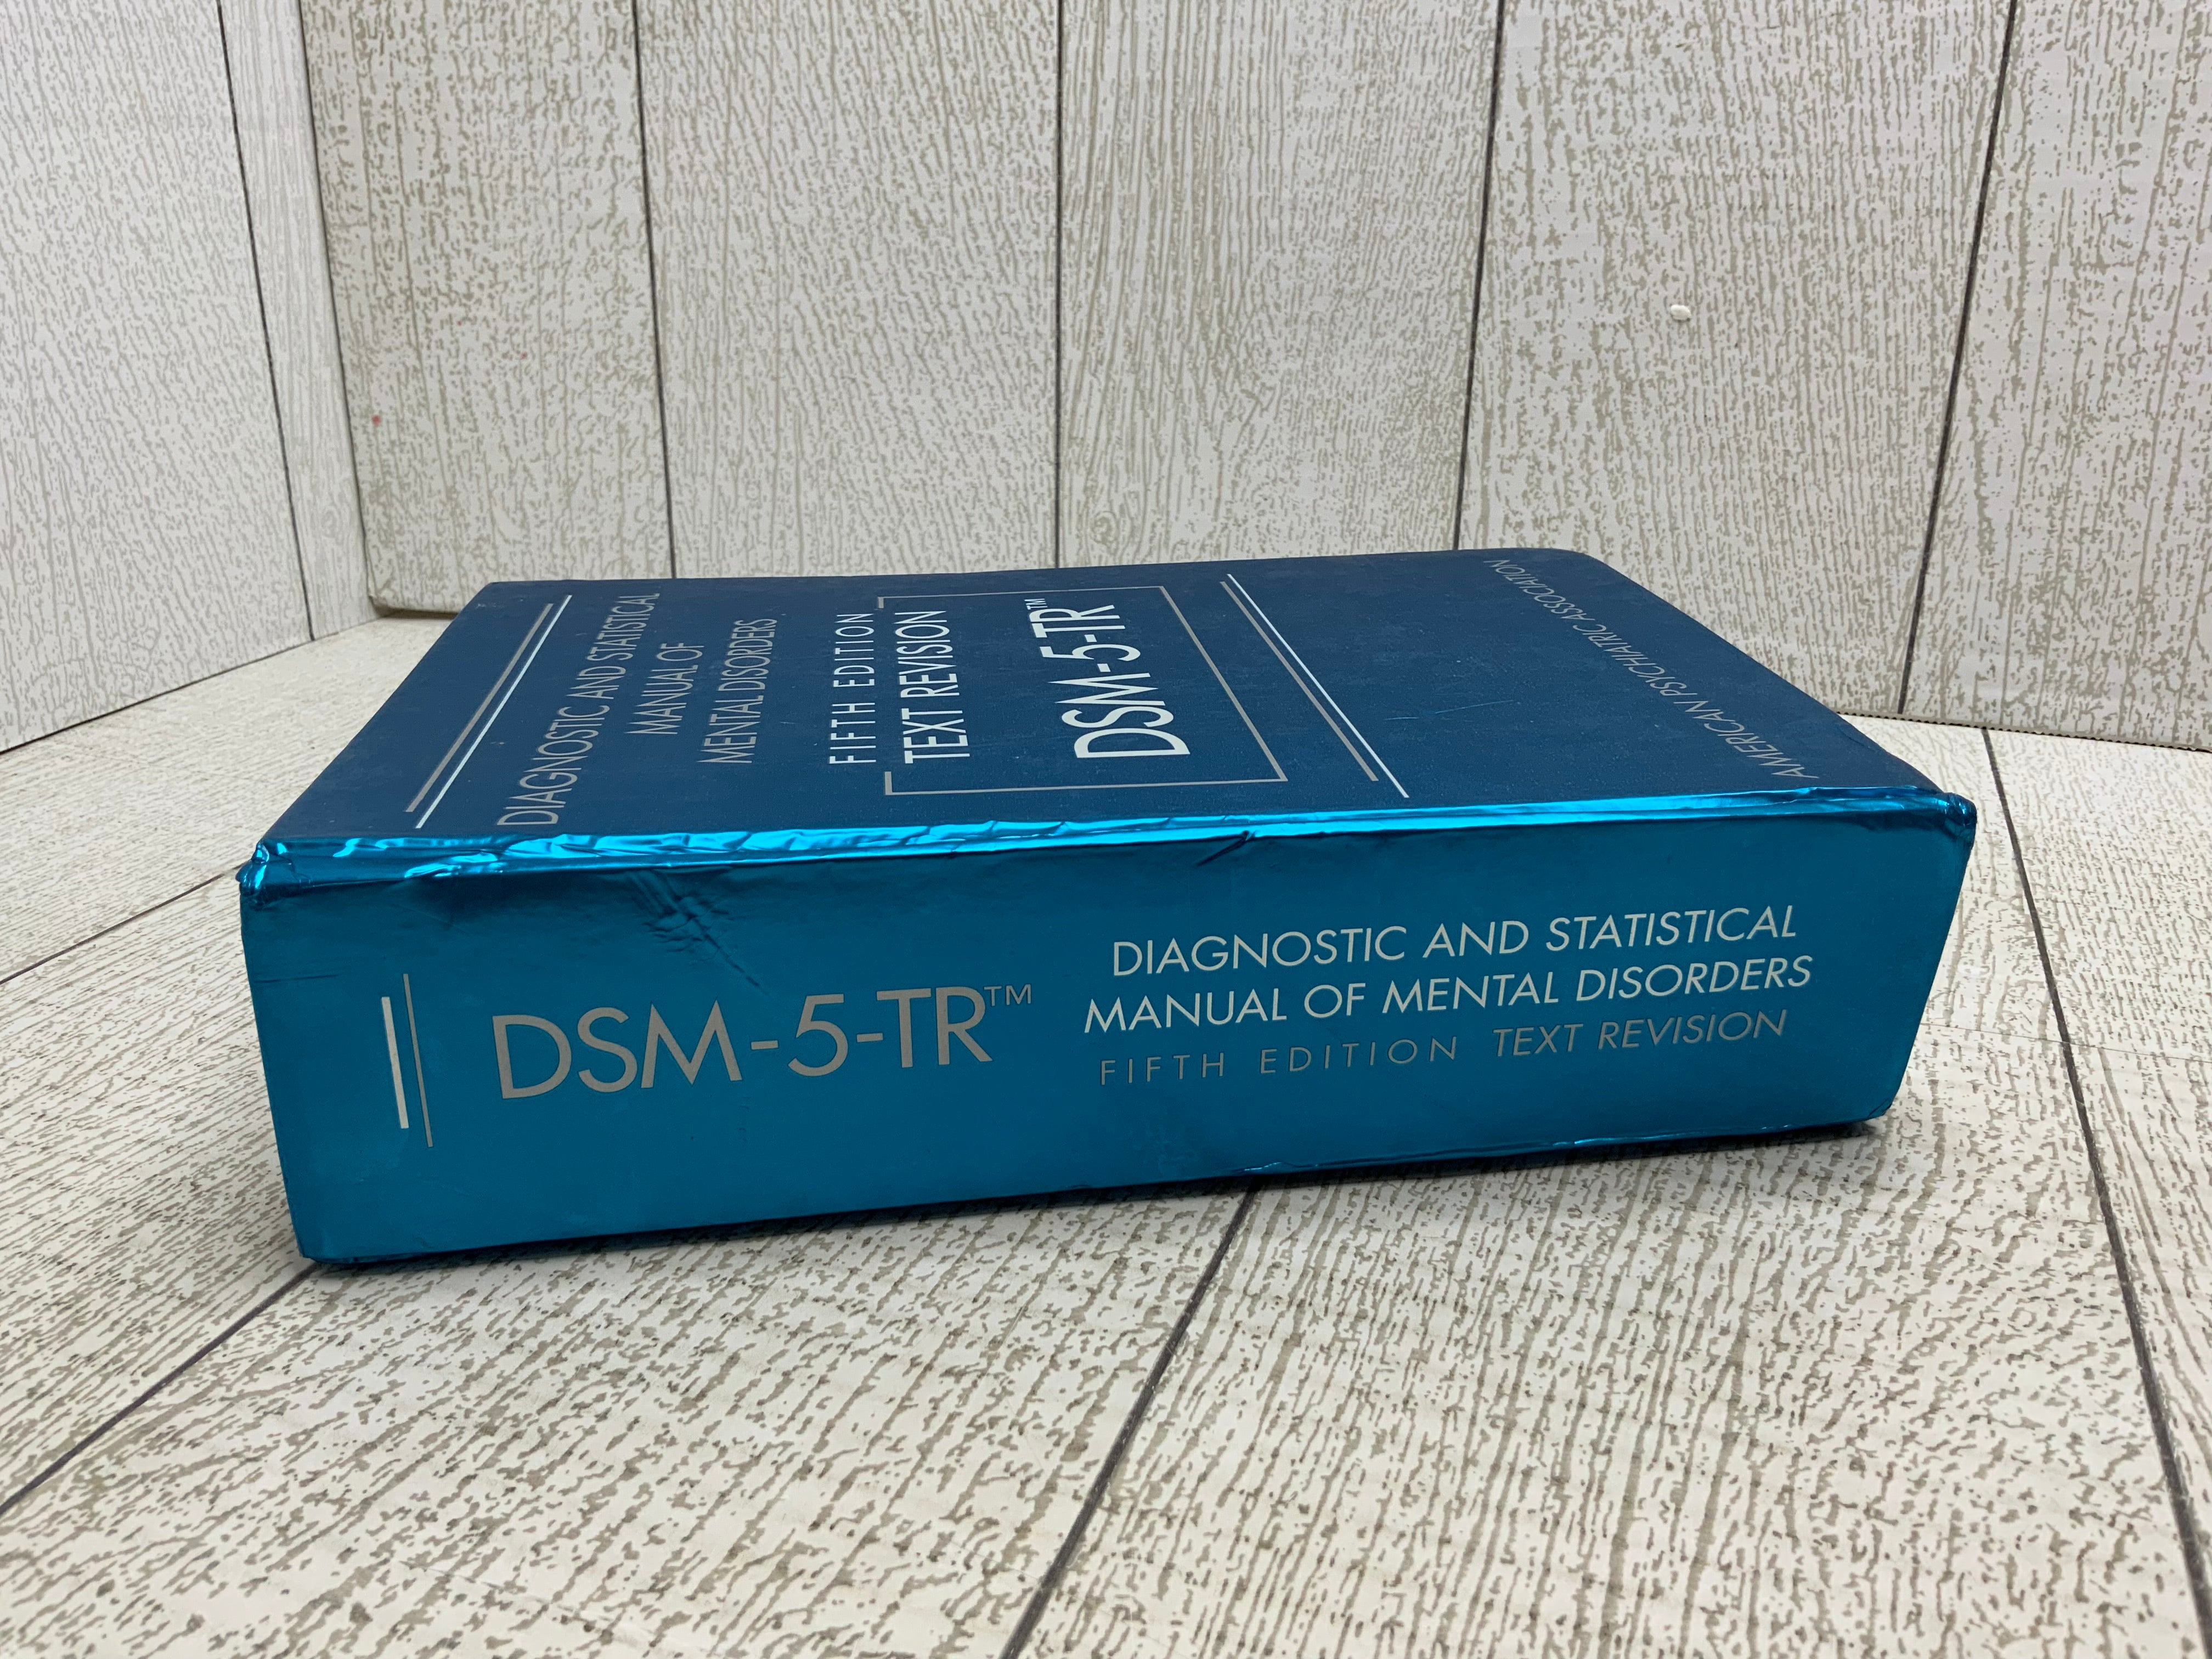 Diagnostic and Statistical Manual of Mental Disorders, Fifth Edition (8064152568046)